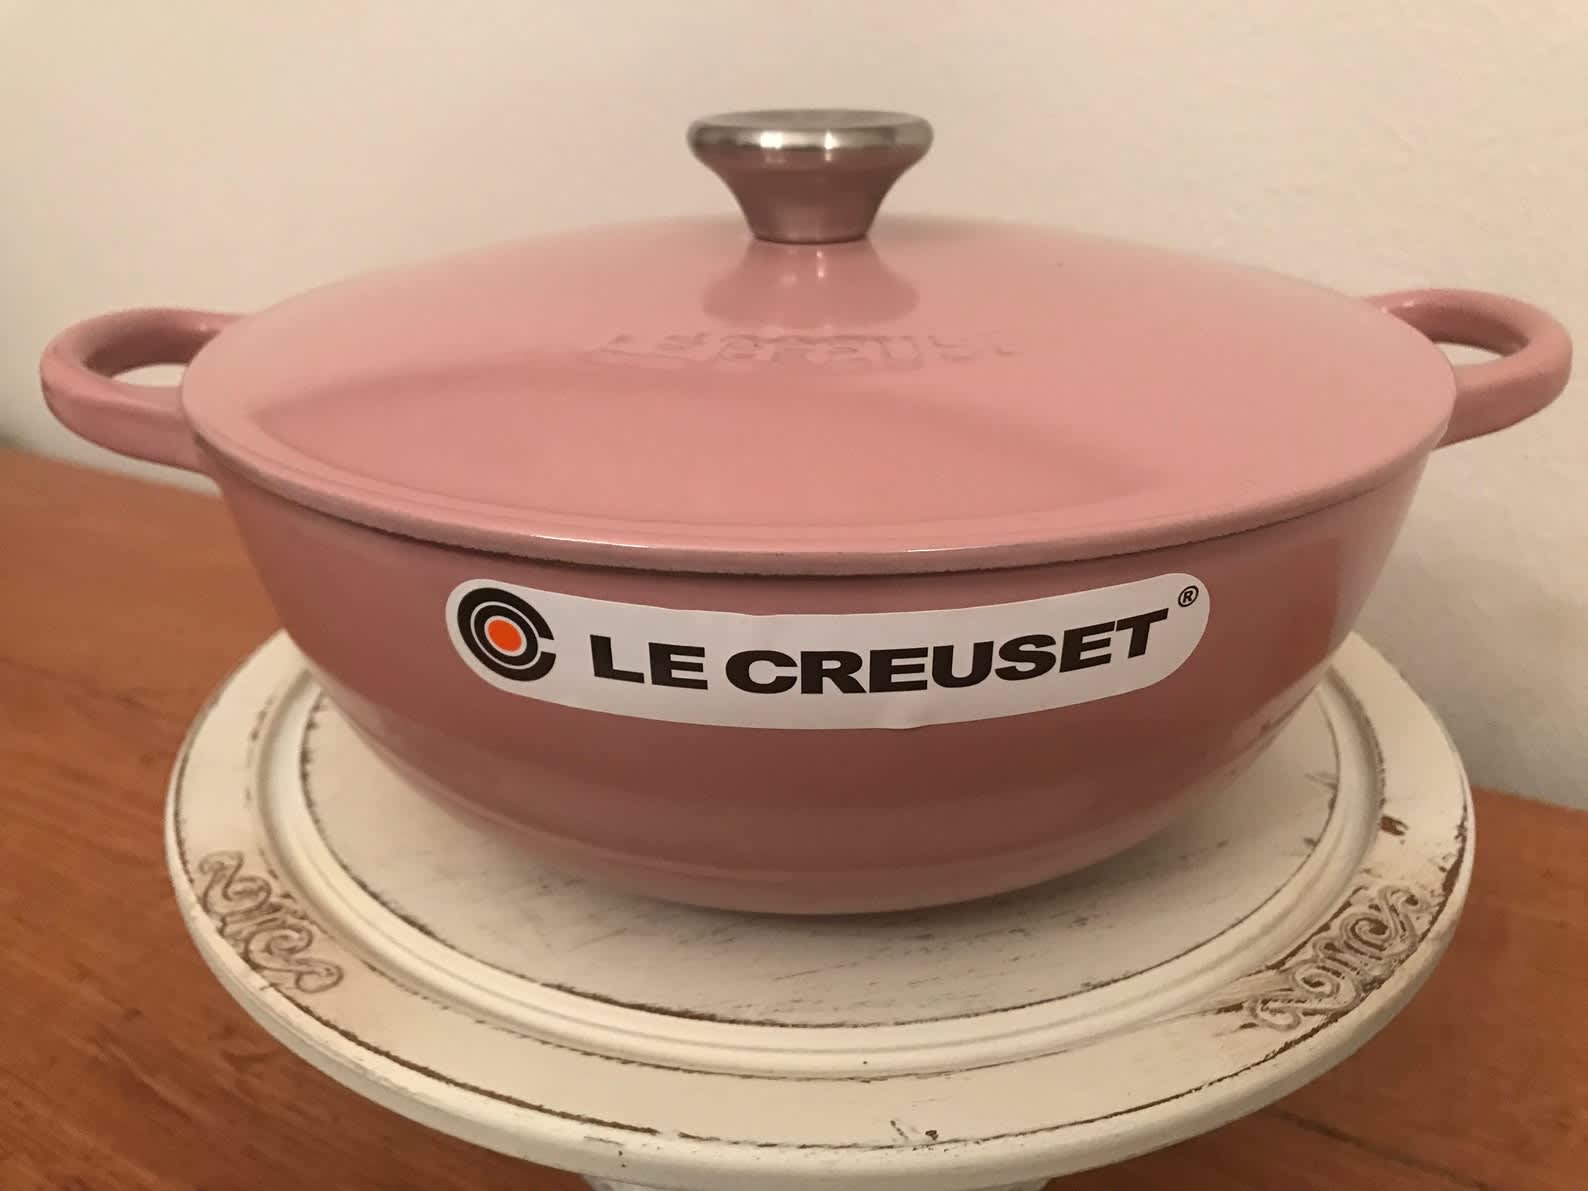 Sells Vintage Le Creuset Products – SheKnows